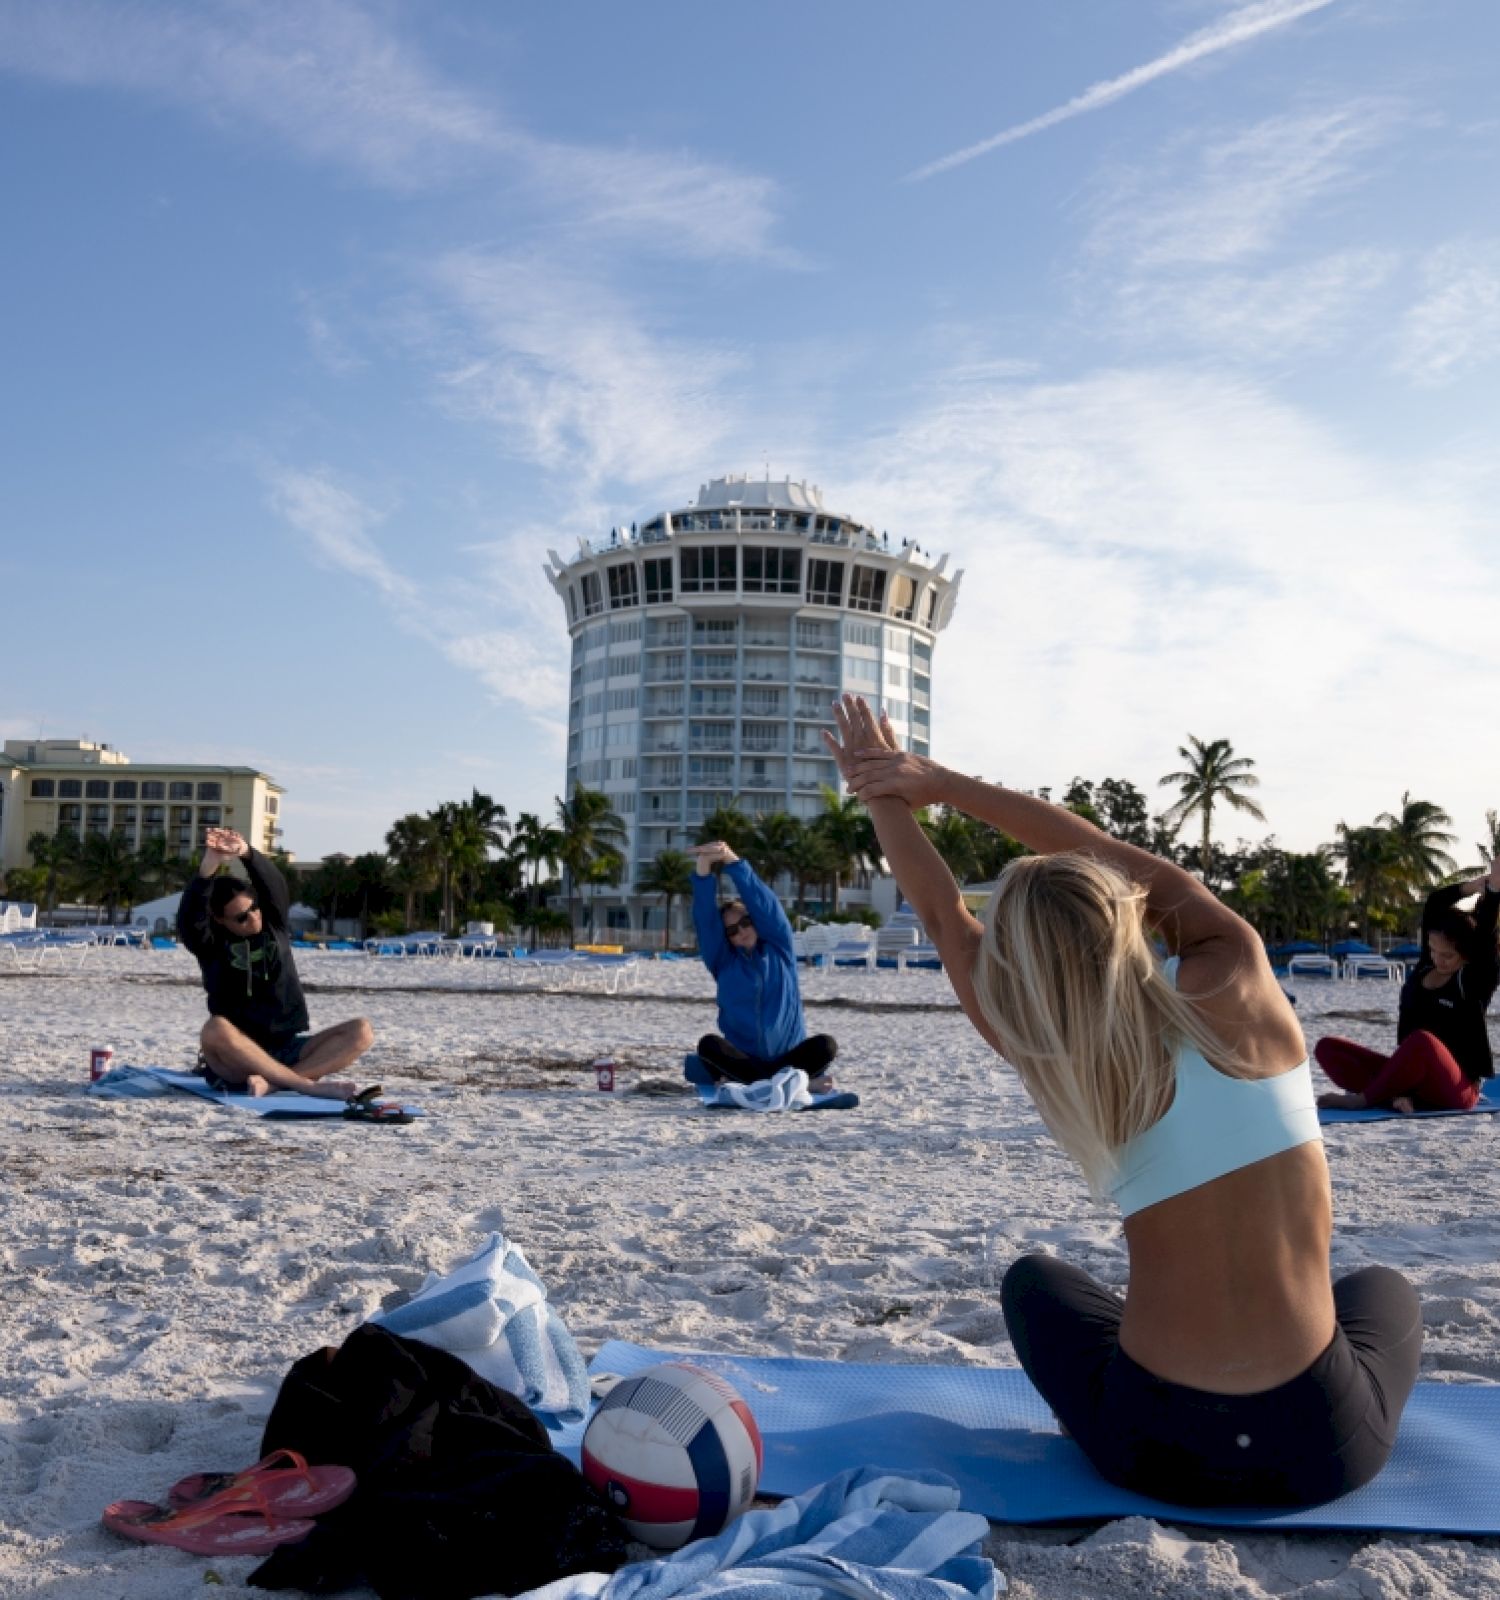 People are practicing yoga on a beach at sunset.